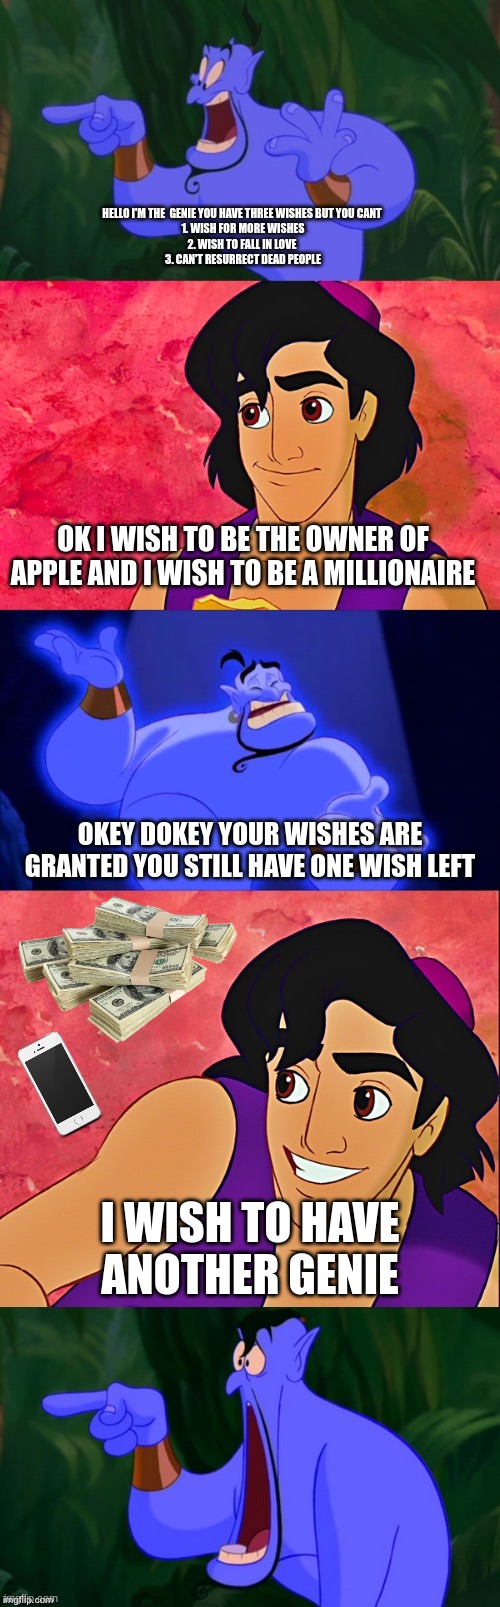 Another Genie | HELLO I'M THE  GENIE YOU HAVE THREE WISHES BUT YOU CANT 
1. WISH FOR MORE WISHES
2. WISH TO FALL IN LOVE 
3. CAN'T RESURRECT DEAD PEOPLE; OK I WISH TO BE THE OWNER OF APPLE AND I WISH TO BE A MILLIONAIRE; OKEY DOKEY YOUR WISHES ARE GRANTED YOU STILL HAVE ONE WISH LEFT; I WISH TO HAVE ANOTHER GENIE | image tagged in aladdin and the genie | made w/ Imgflip meme maker